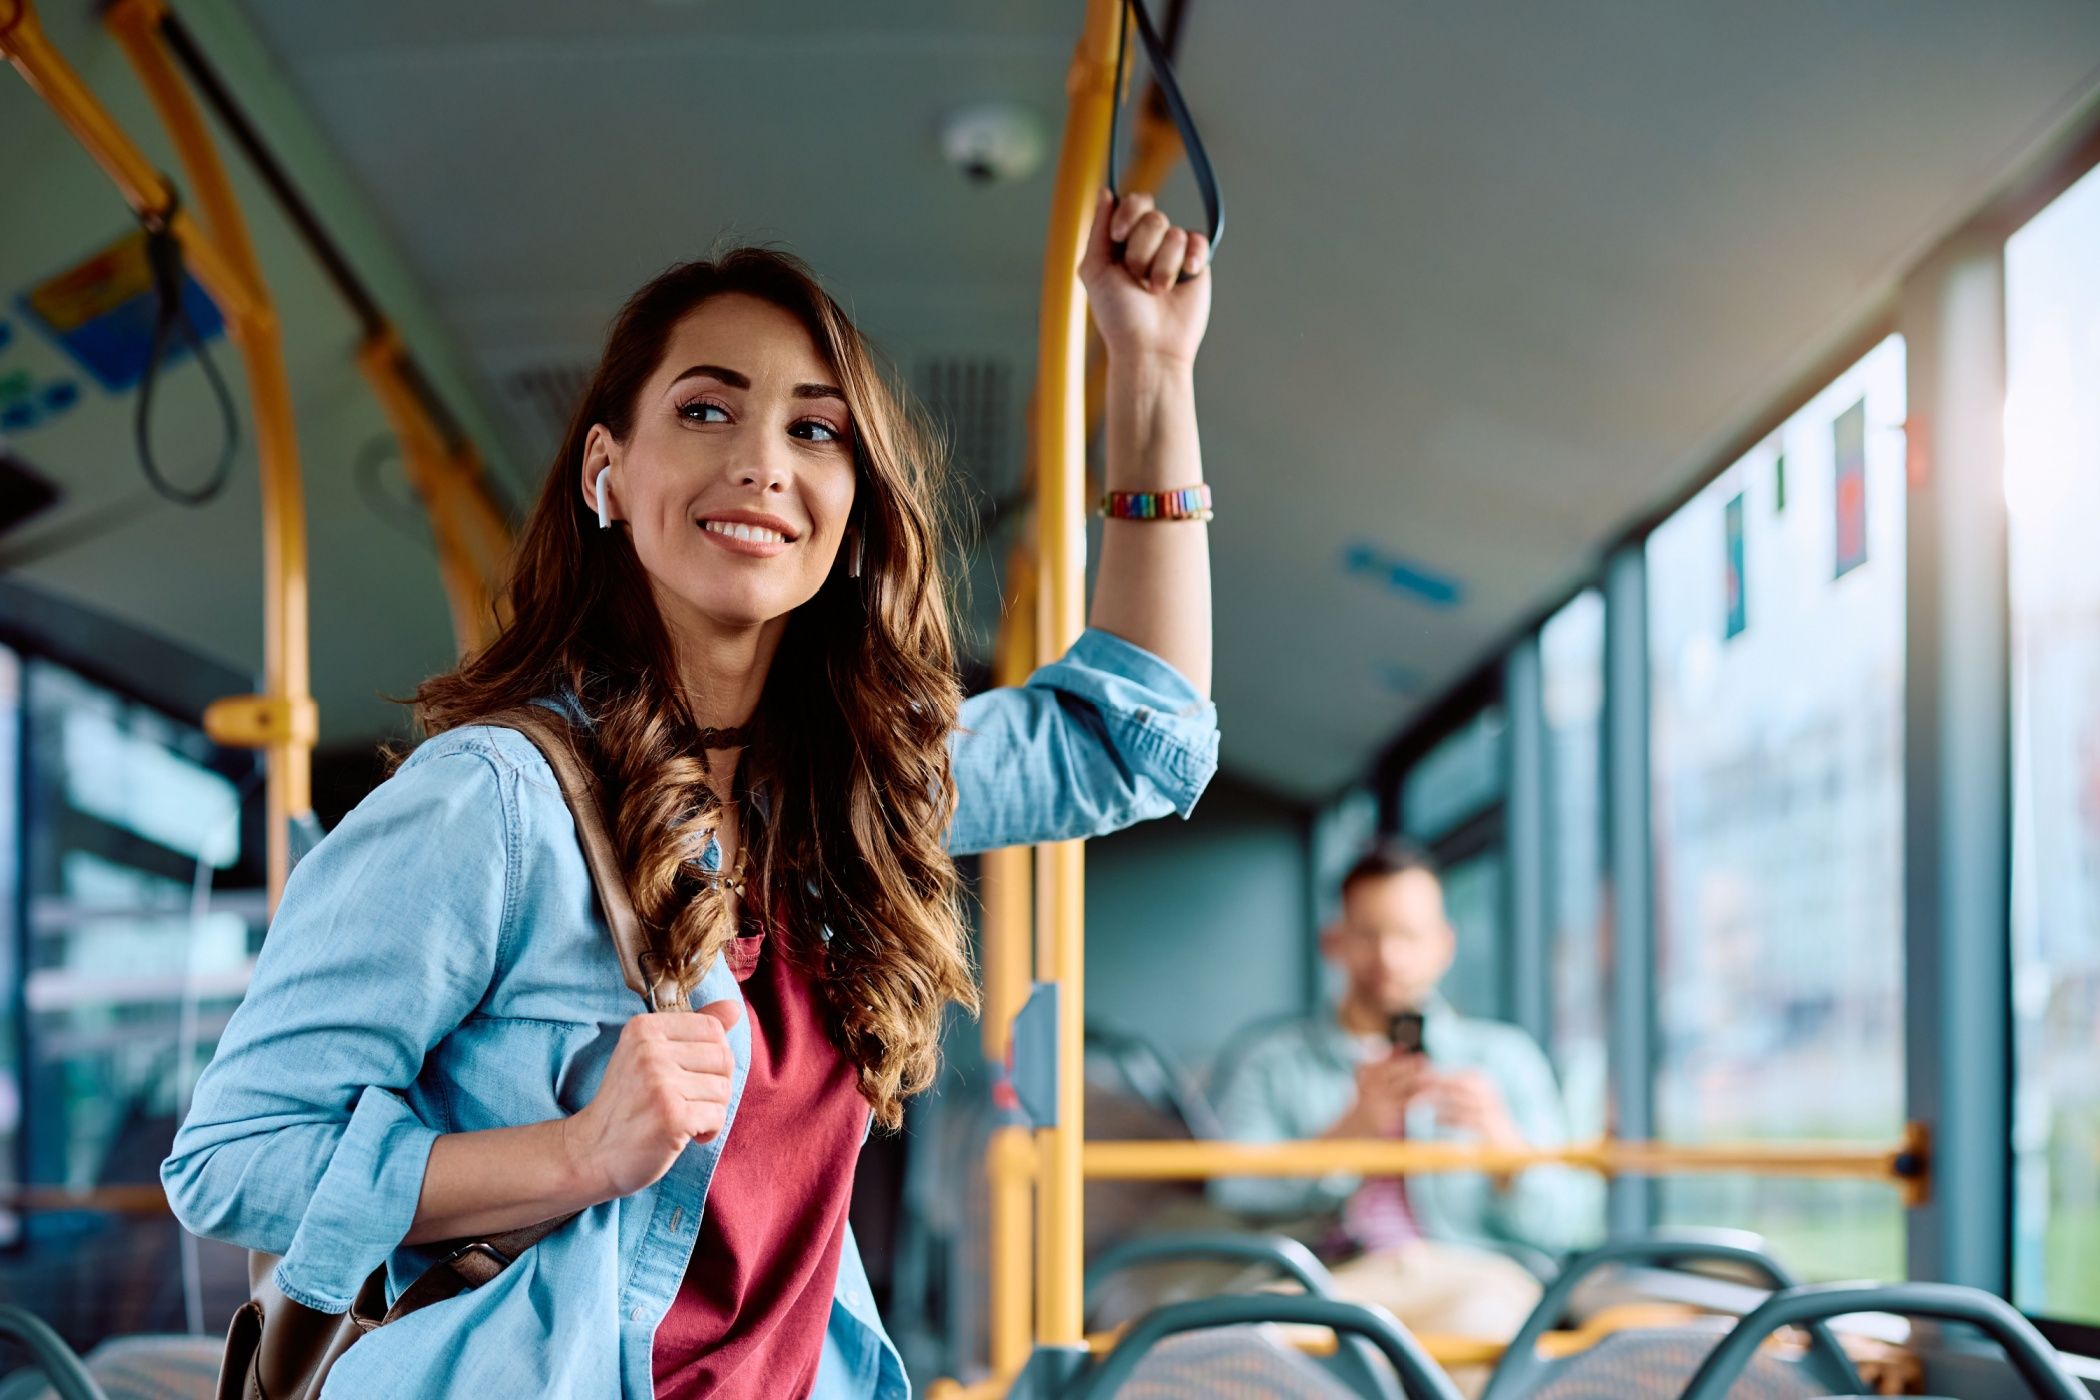 Young smiling woman holding onto a handle while traveling by public bus.